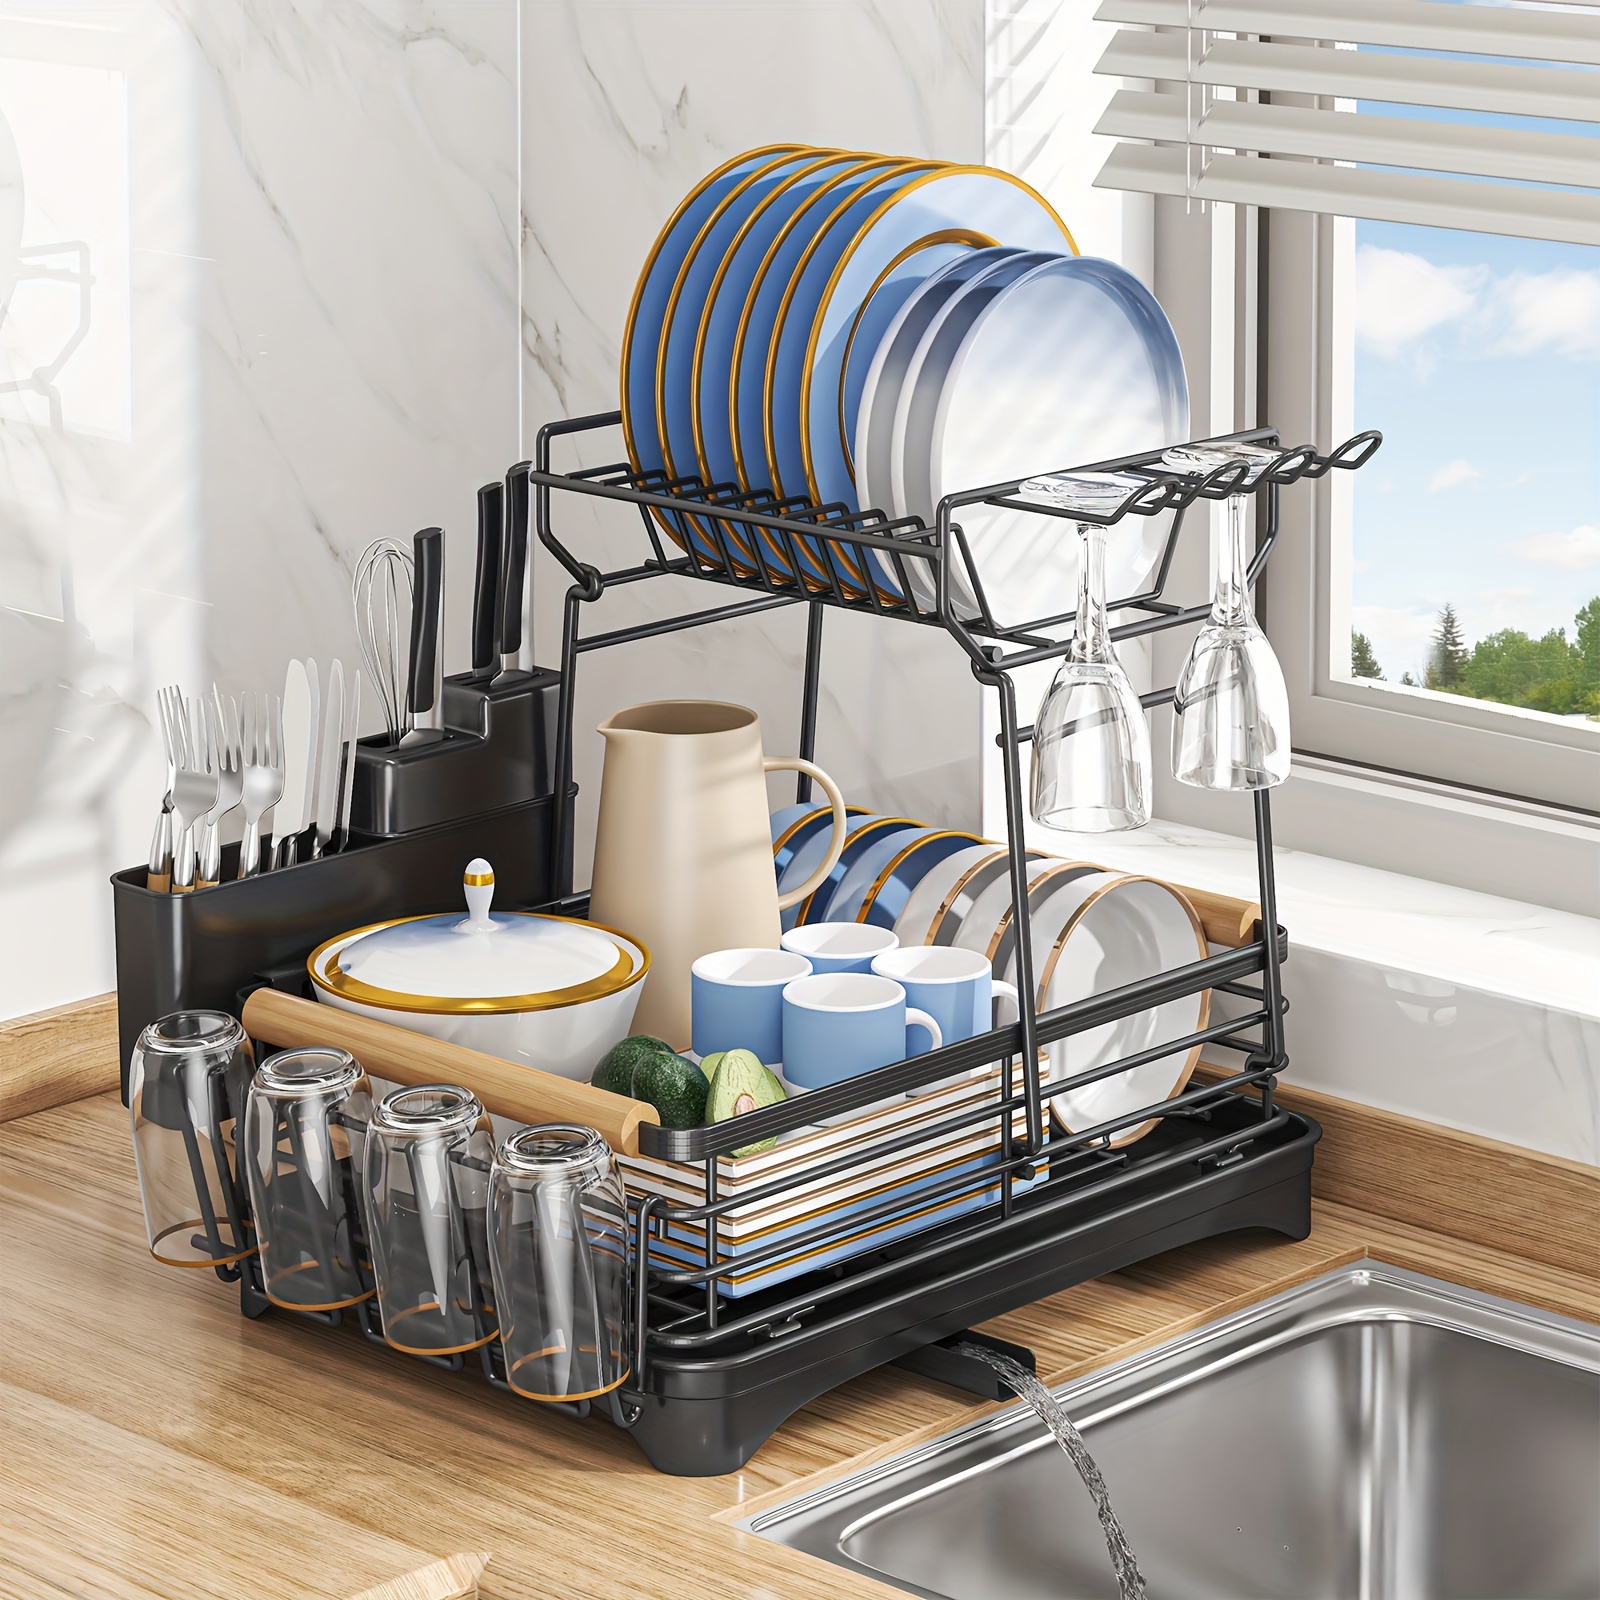 Dish Drying Rack-2 Tier Stainless Steel Large Dish Rack with Drain Board  for Kitchen Counter Drainage, Dish Drainers with Wine Glass Holder, Utensil